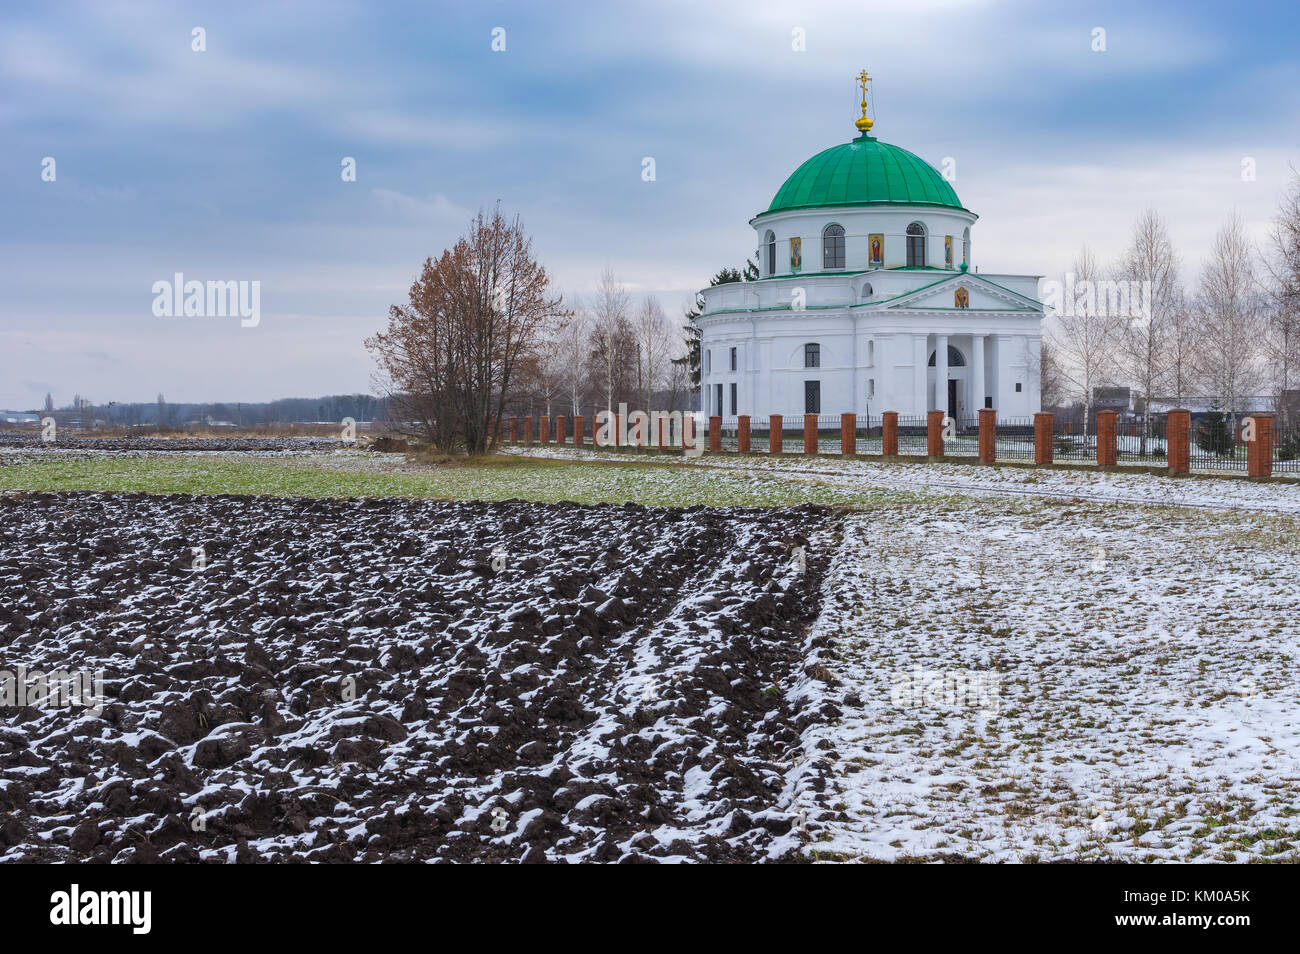 Landscape with agricultural fields near an ancient church of St. Nicholas (1797) in the urban settlement Dikanka, Ukraine. Stock Photo